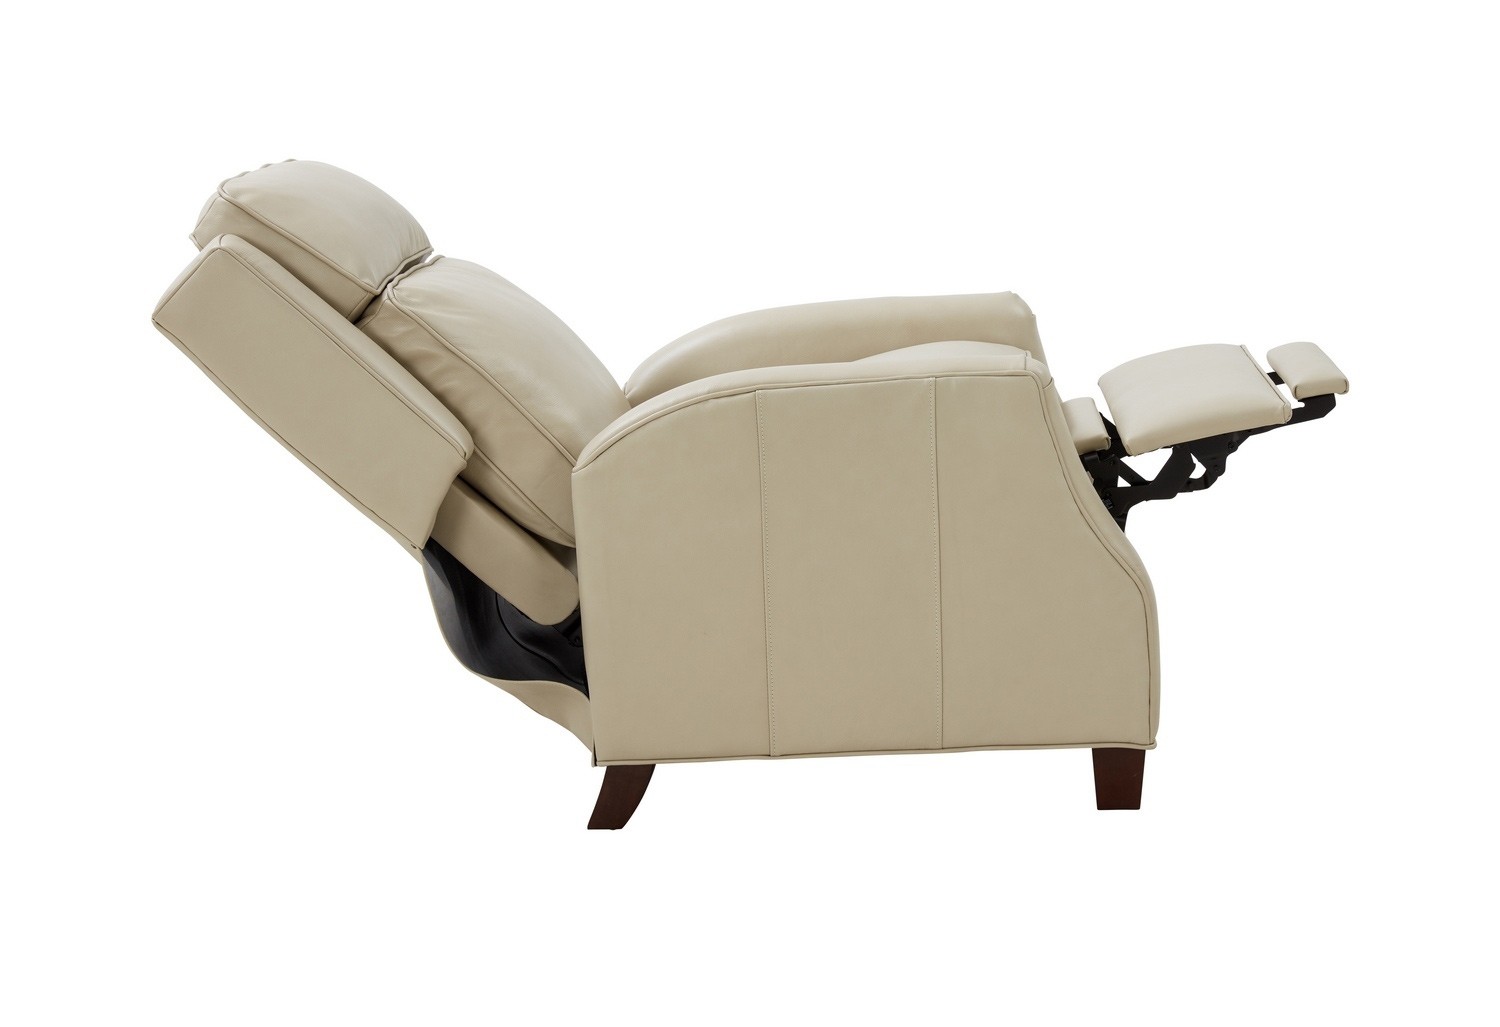 Barcalounger Nixon Recliner Chair - Barone Parchment/All Leather